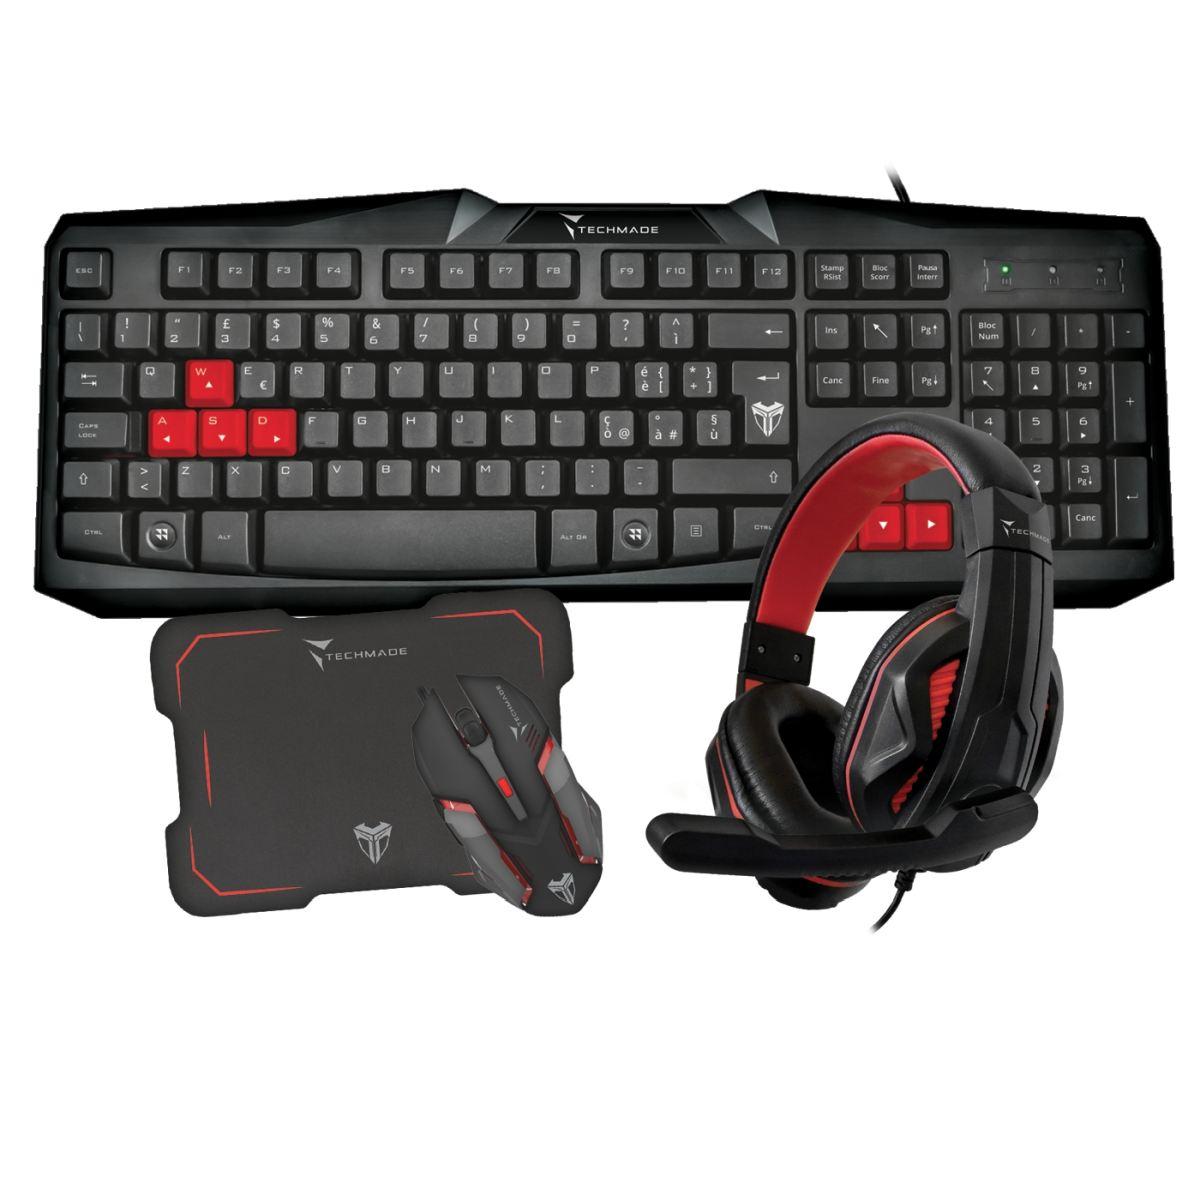 Techmade kit gaming 2 tastiera-mouse-cuffie-pad